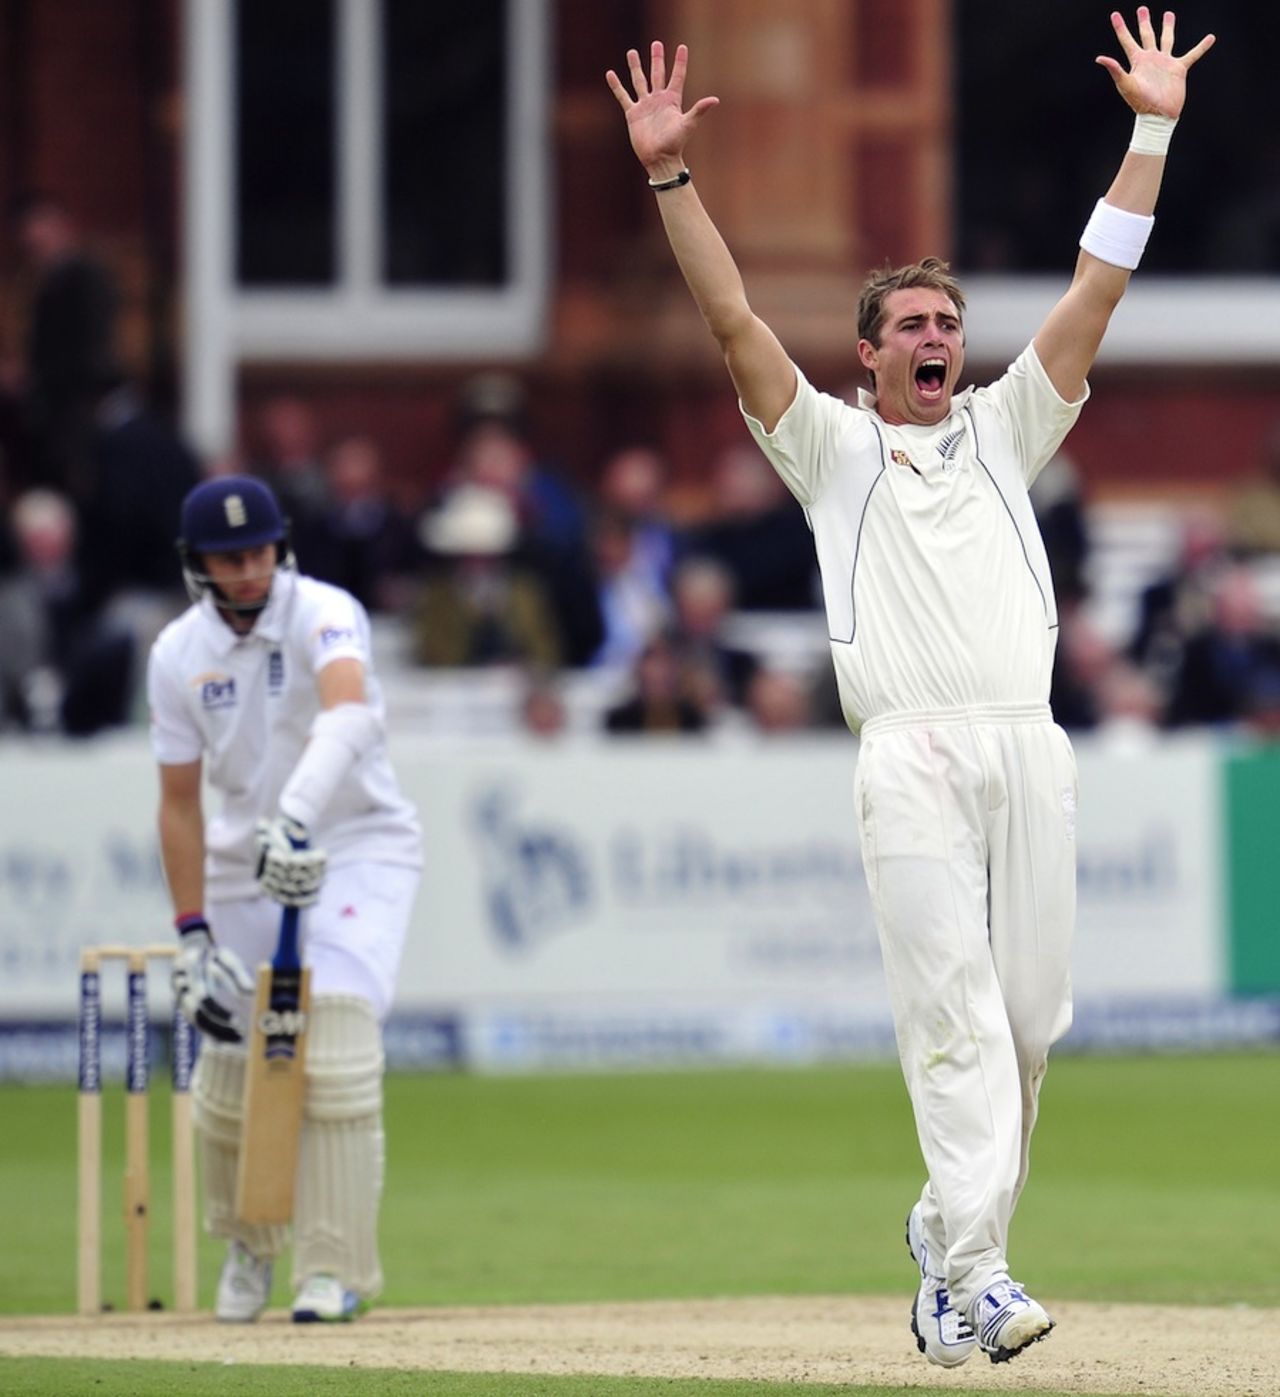 Tim Southee appeals unsuccessfully against Joe Root, England v New Zealand, 1st Investec Test, Lord's, 3rd day, May 18, 2013